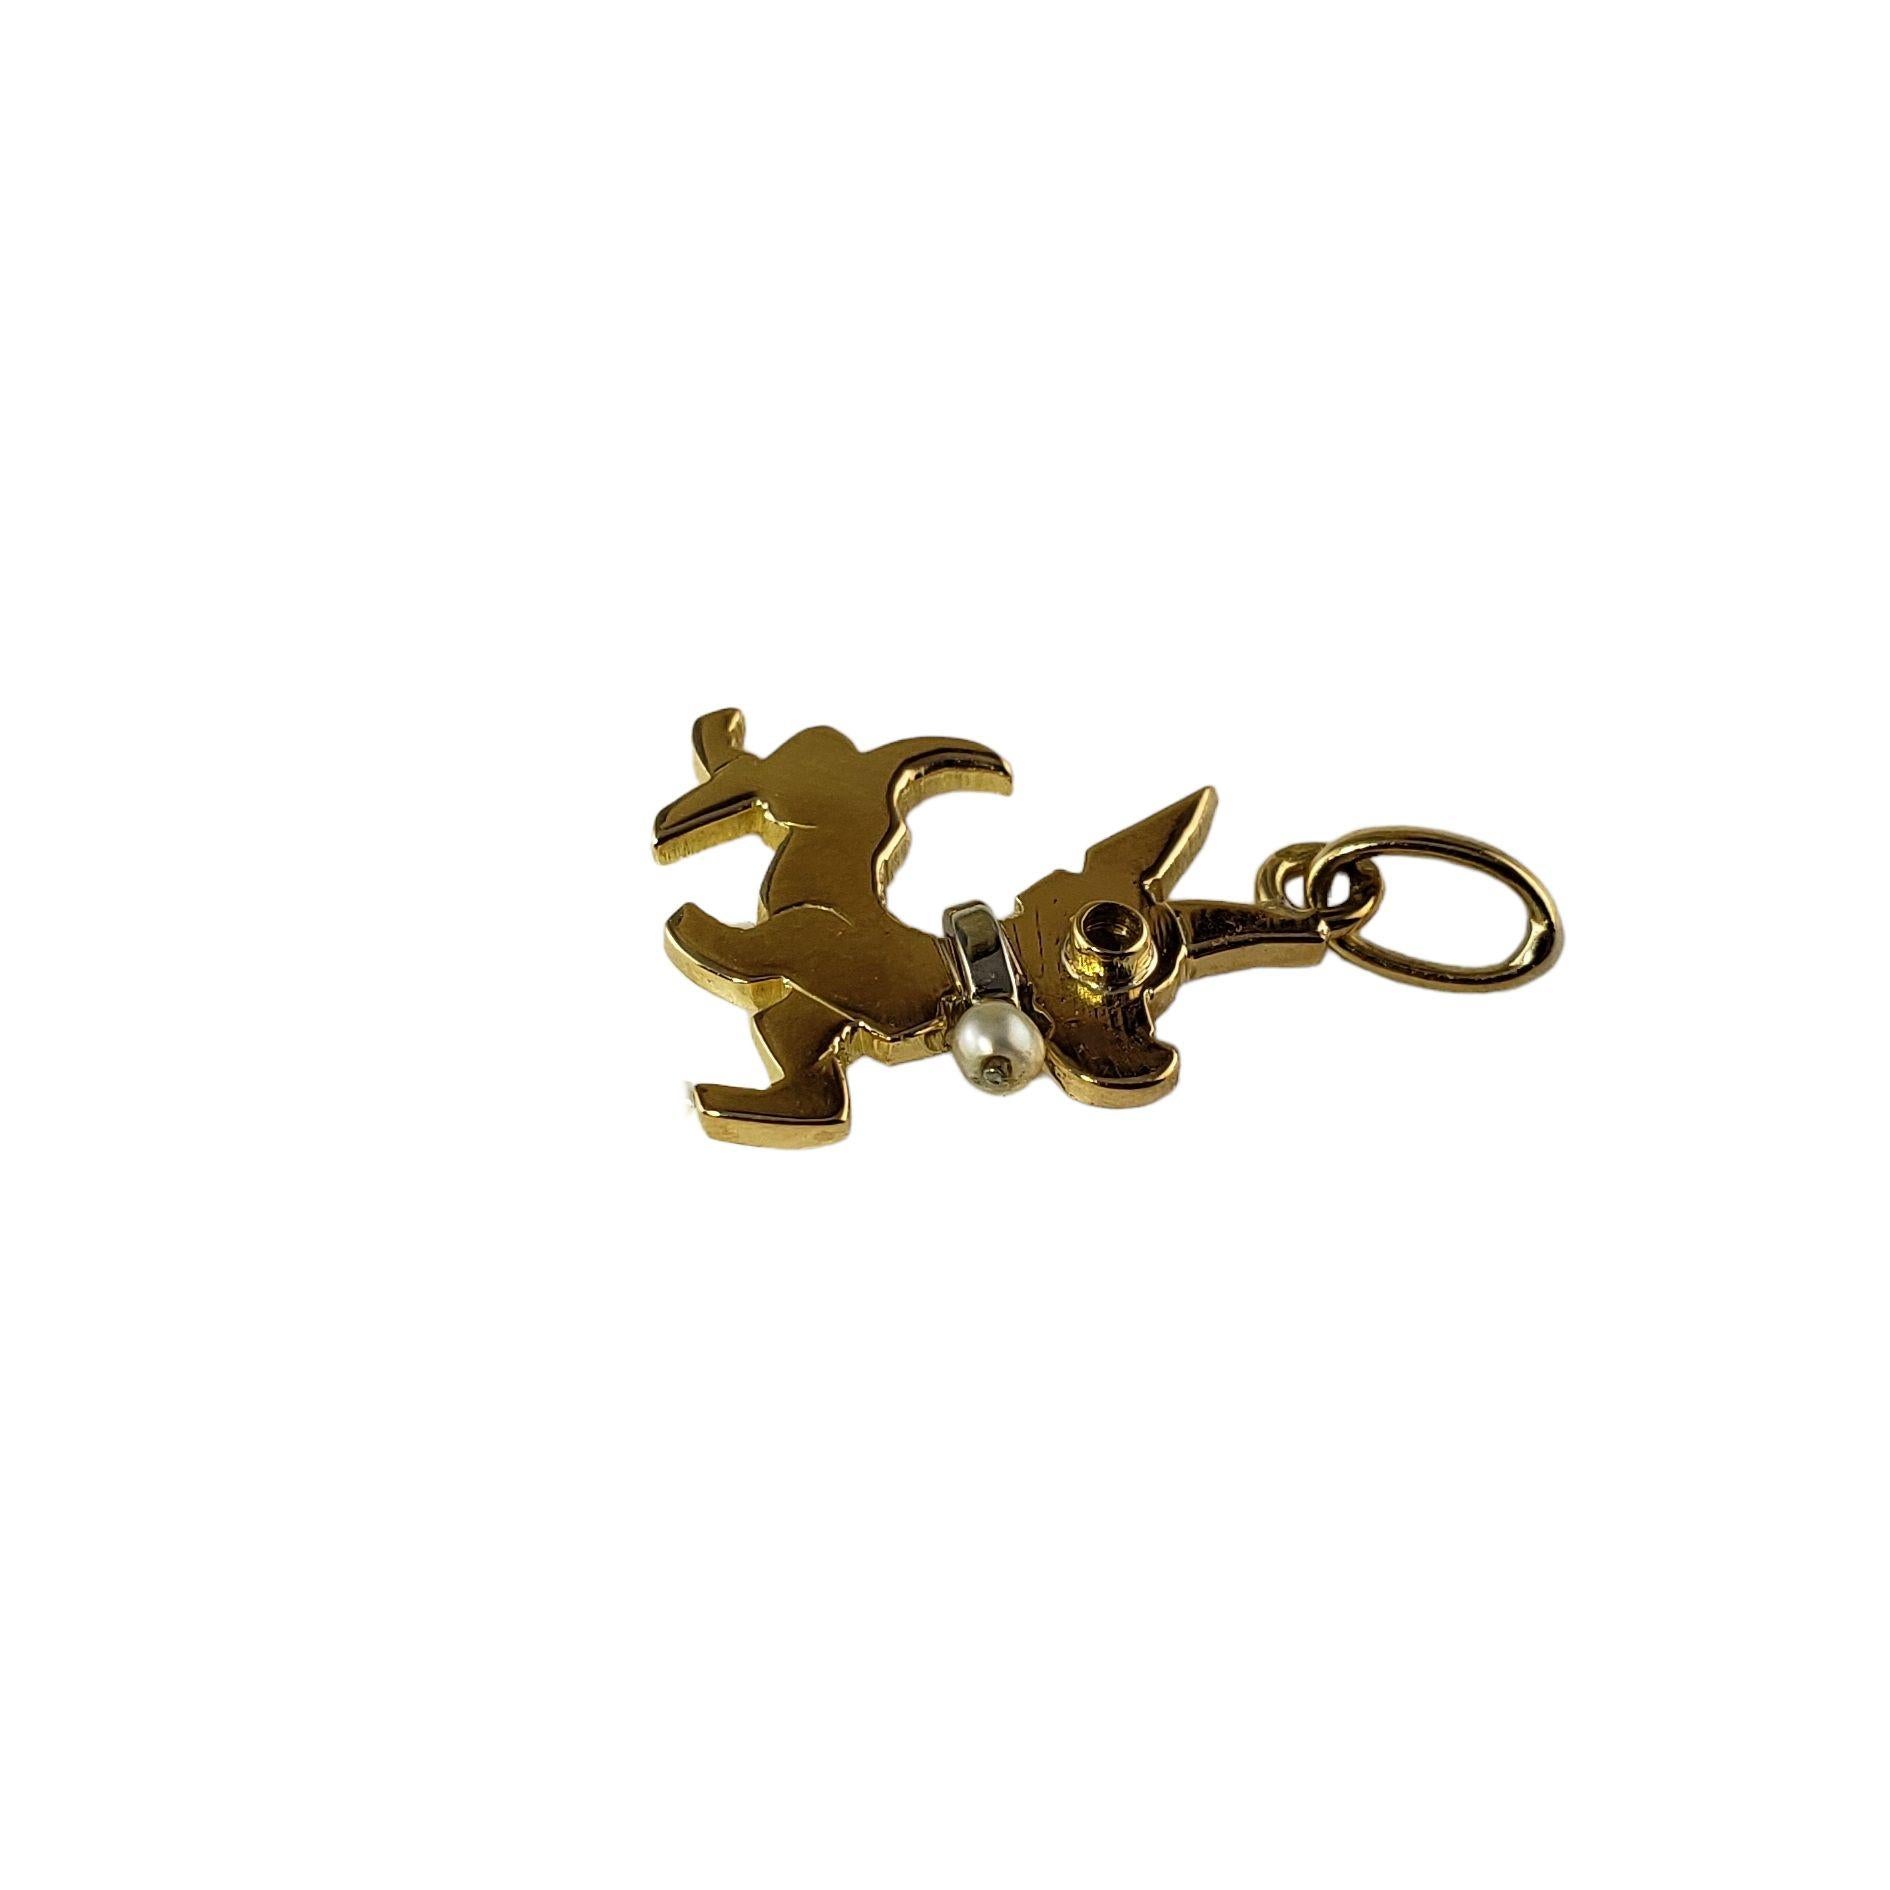 This adorable dog charm features one seed pearl and one red gemstone set in beautifully detailed 14K yellow and white gold.

Size:  15 mm x 12 mm

Weight:  1.2 gr./  0.7 dwt.

Tested 14K gold.

Very good condition, professionally polished.

Will